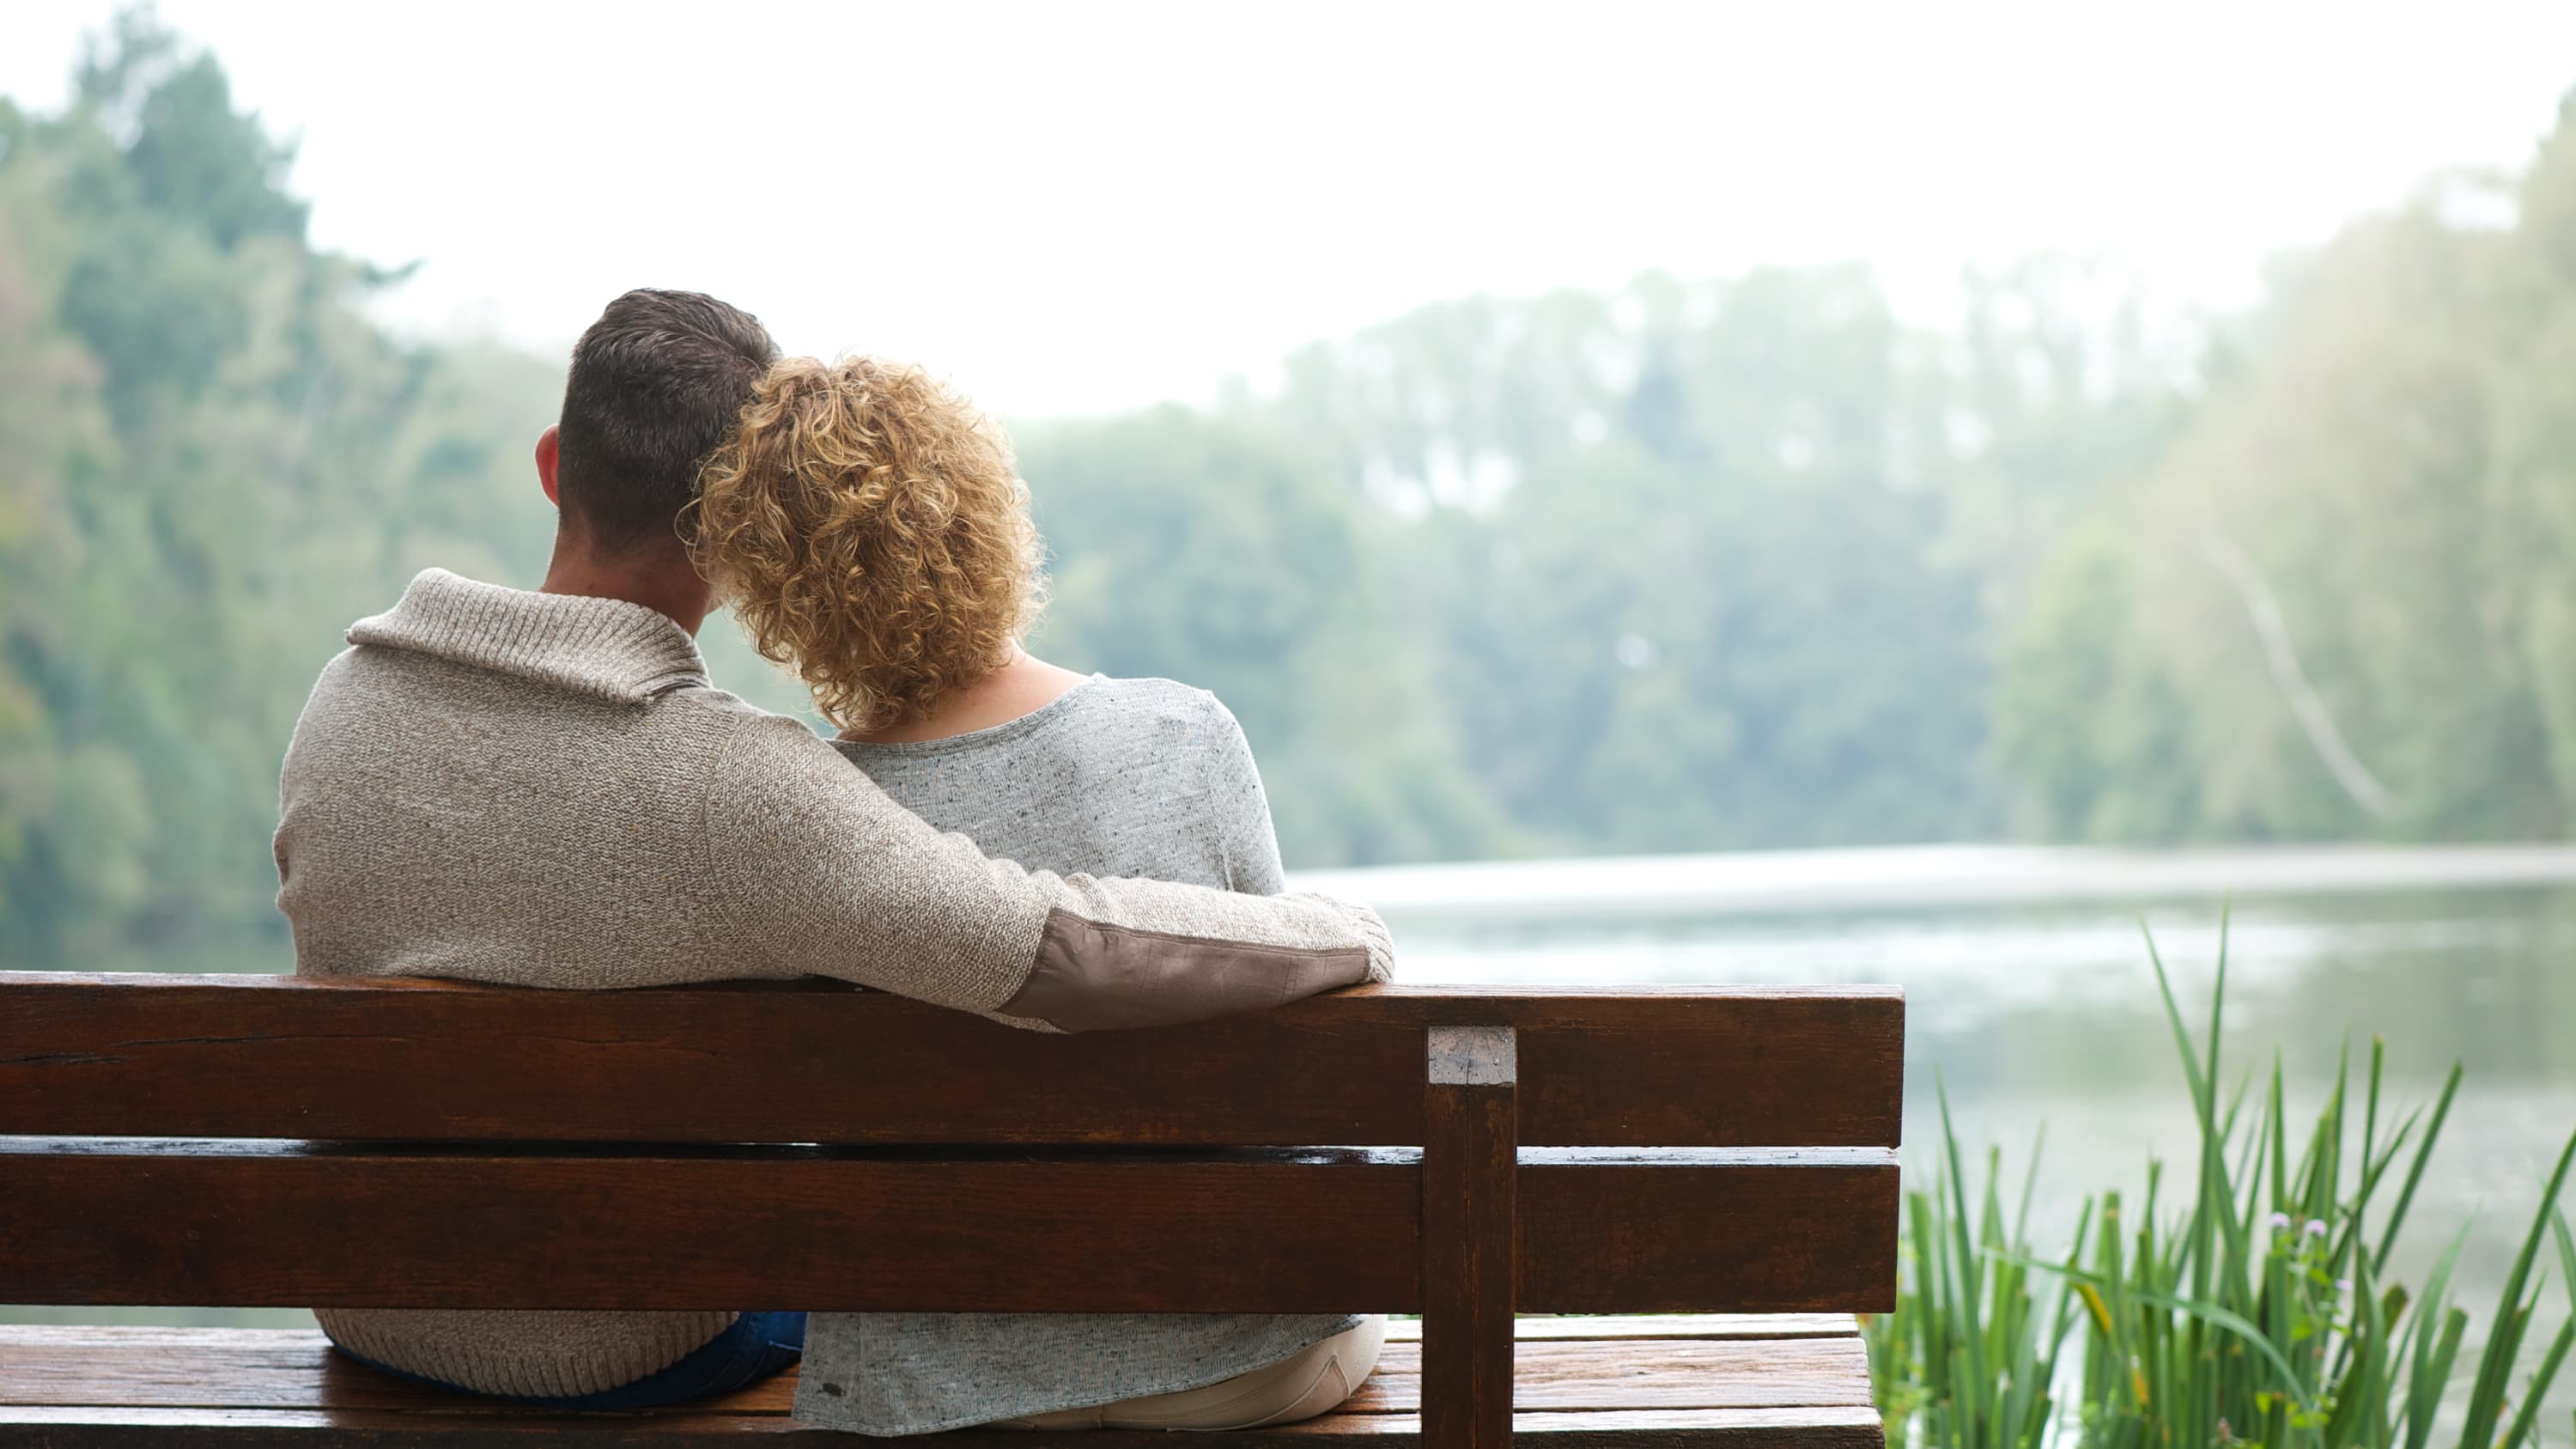 A couple sits and thinks on a park bench, considering female infertility